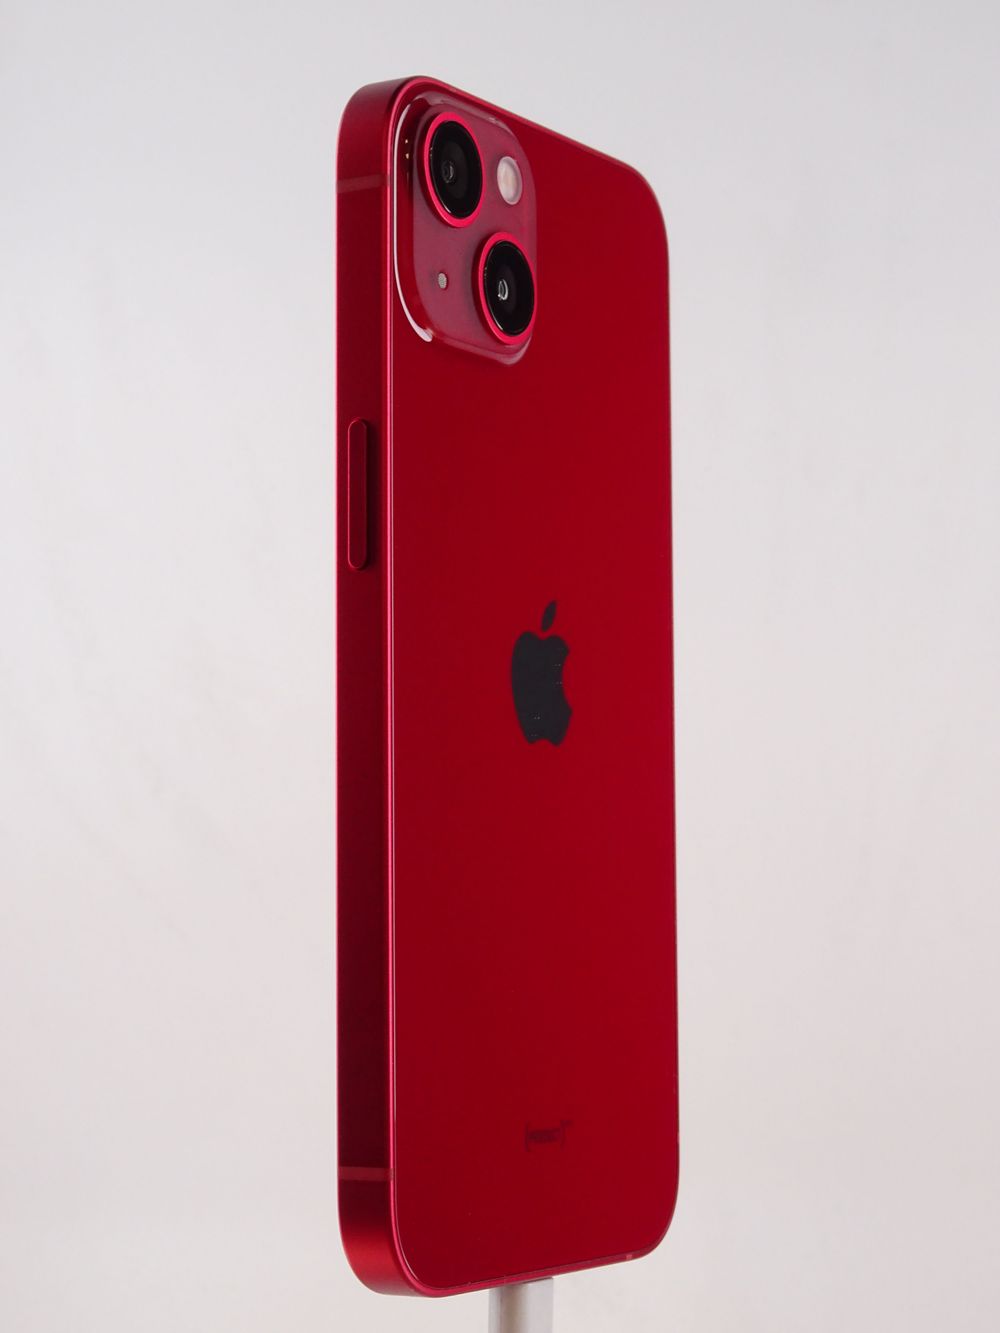 Telefon mobil Apple iPhone 13, Red, 128 GB,  Excelent